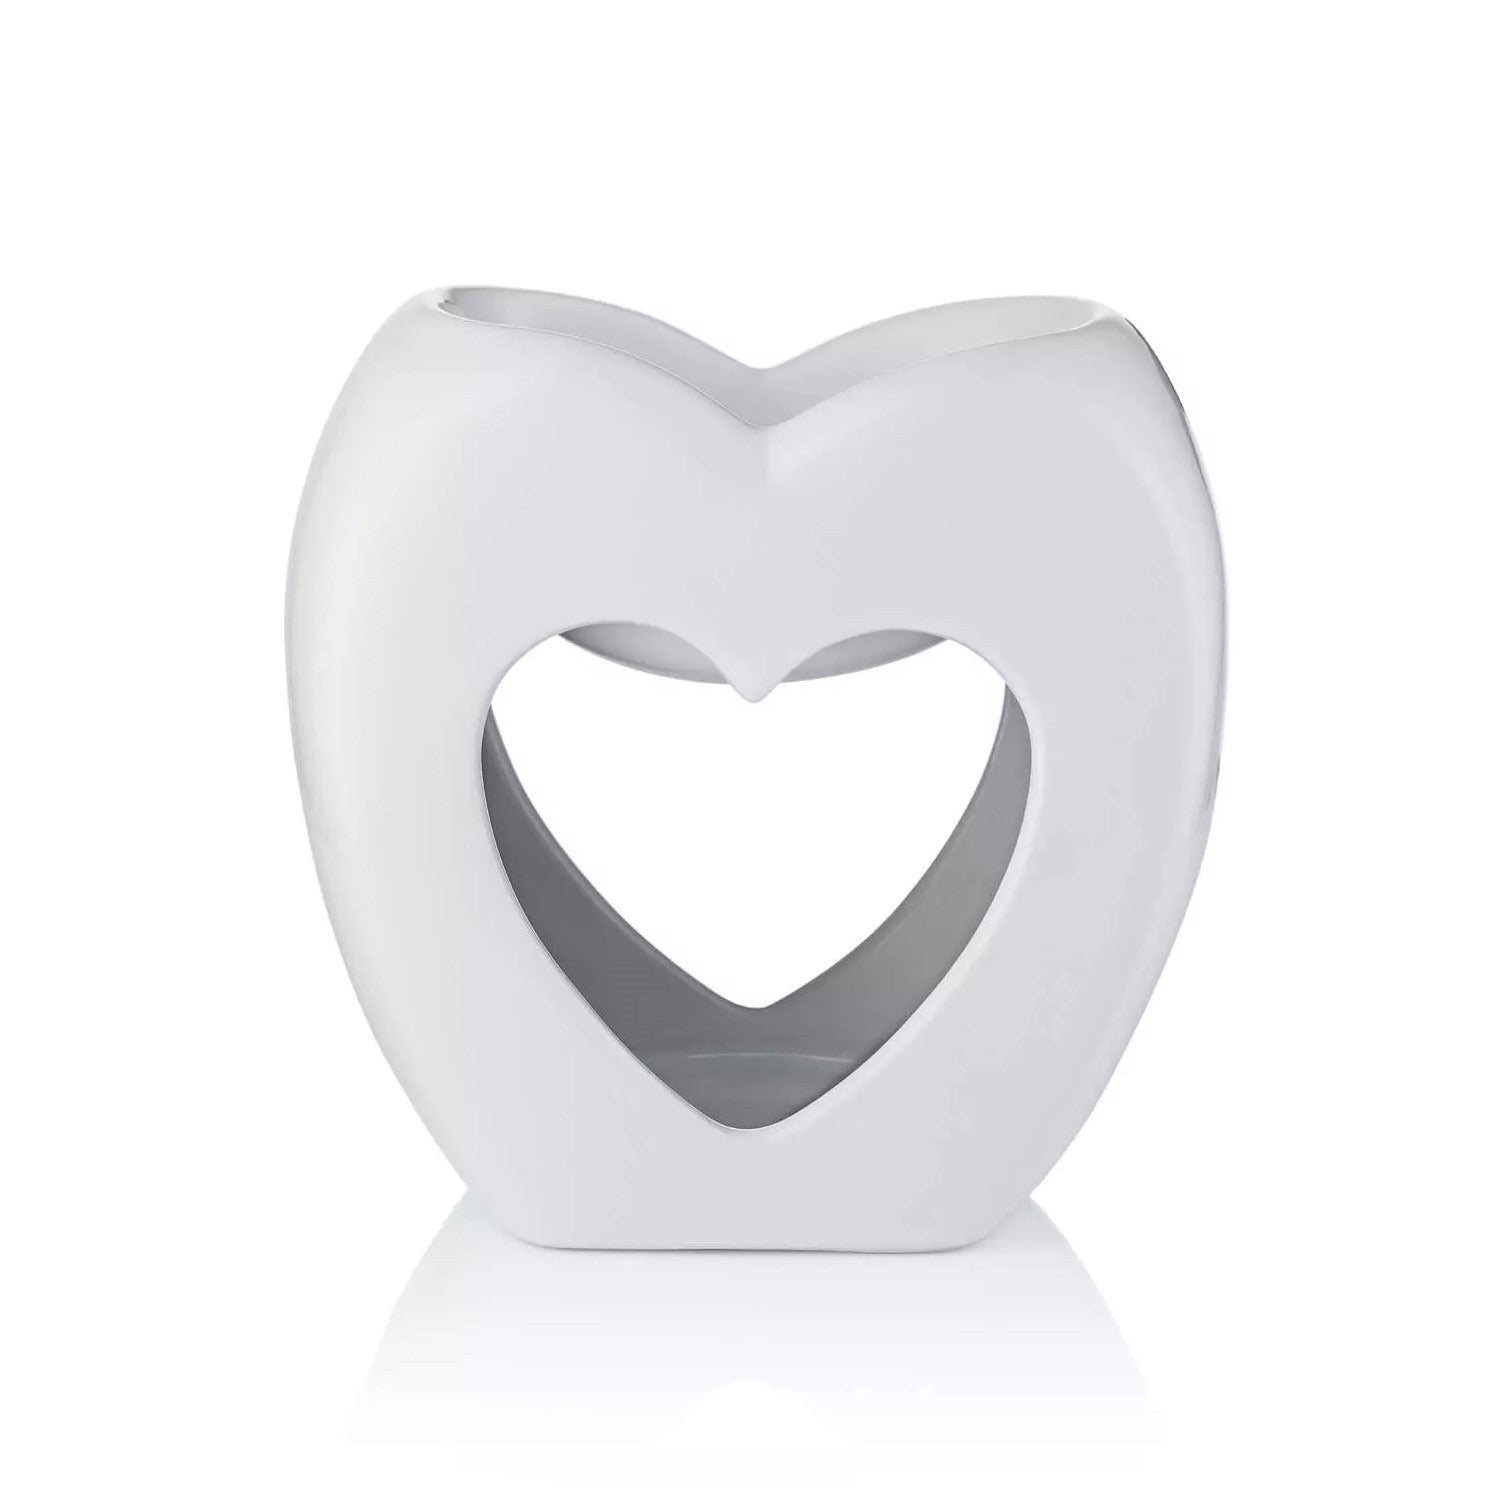 View Ava May Heart Shaped Burner White information